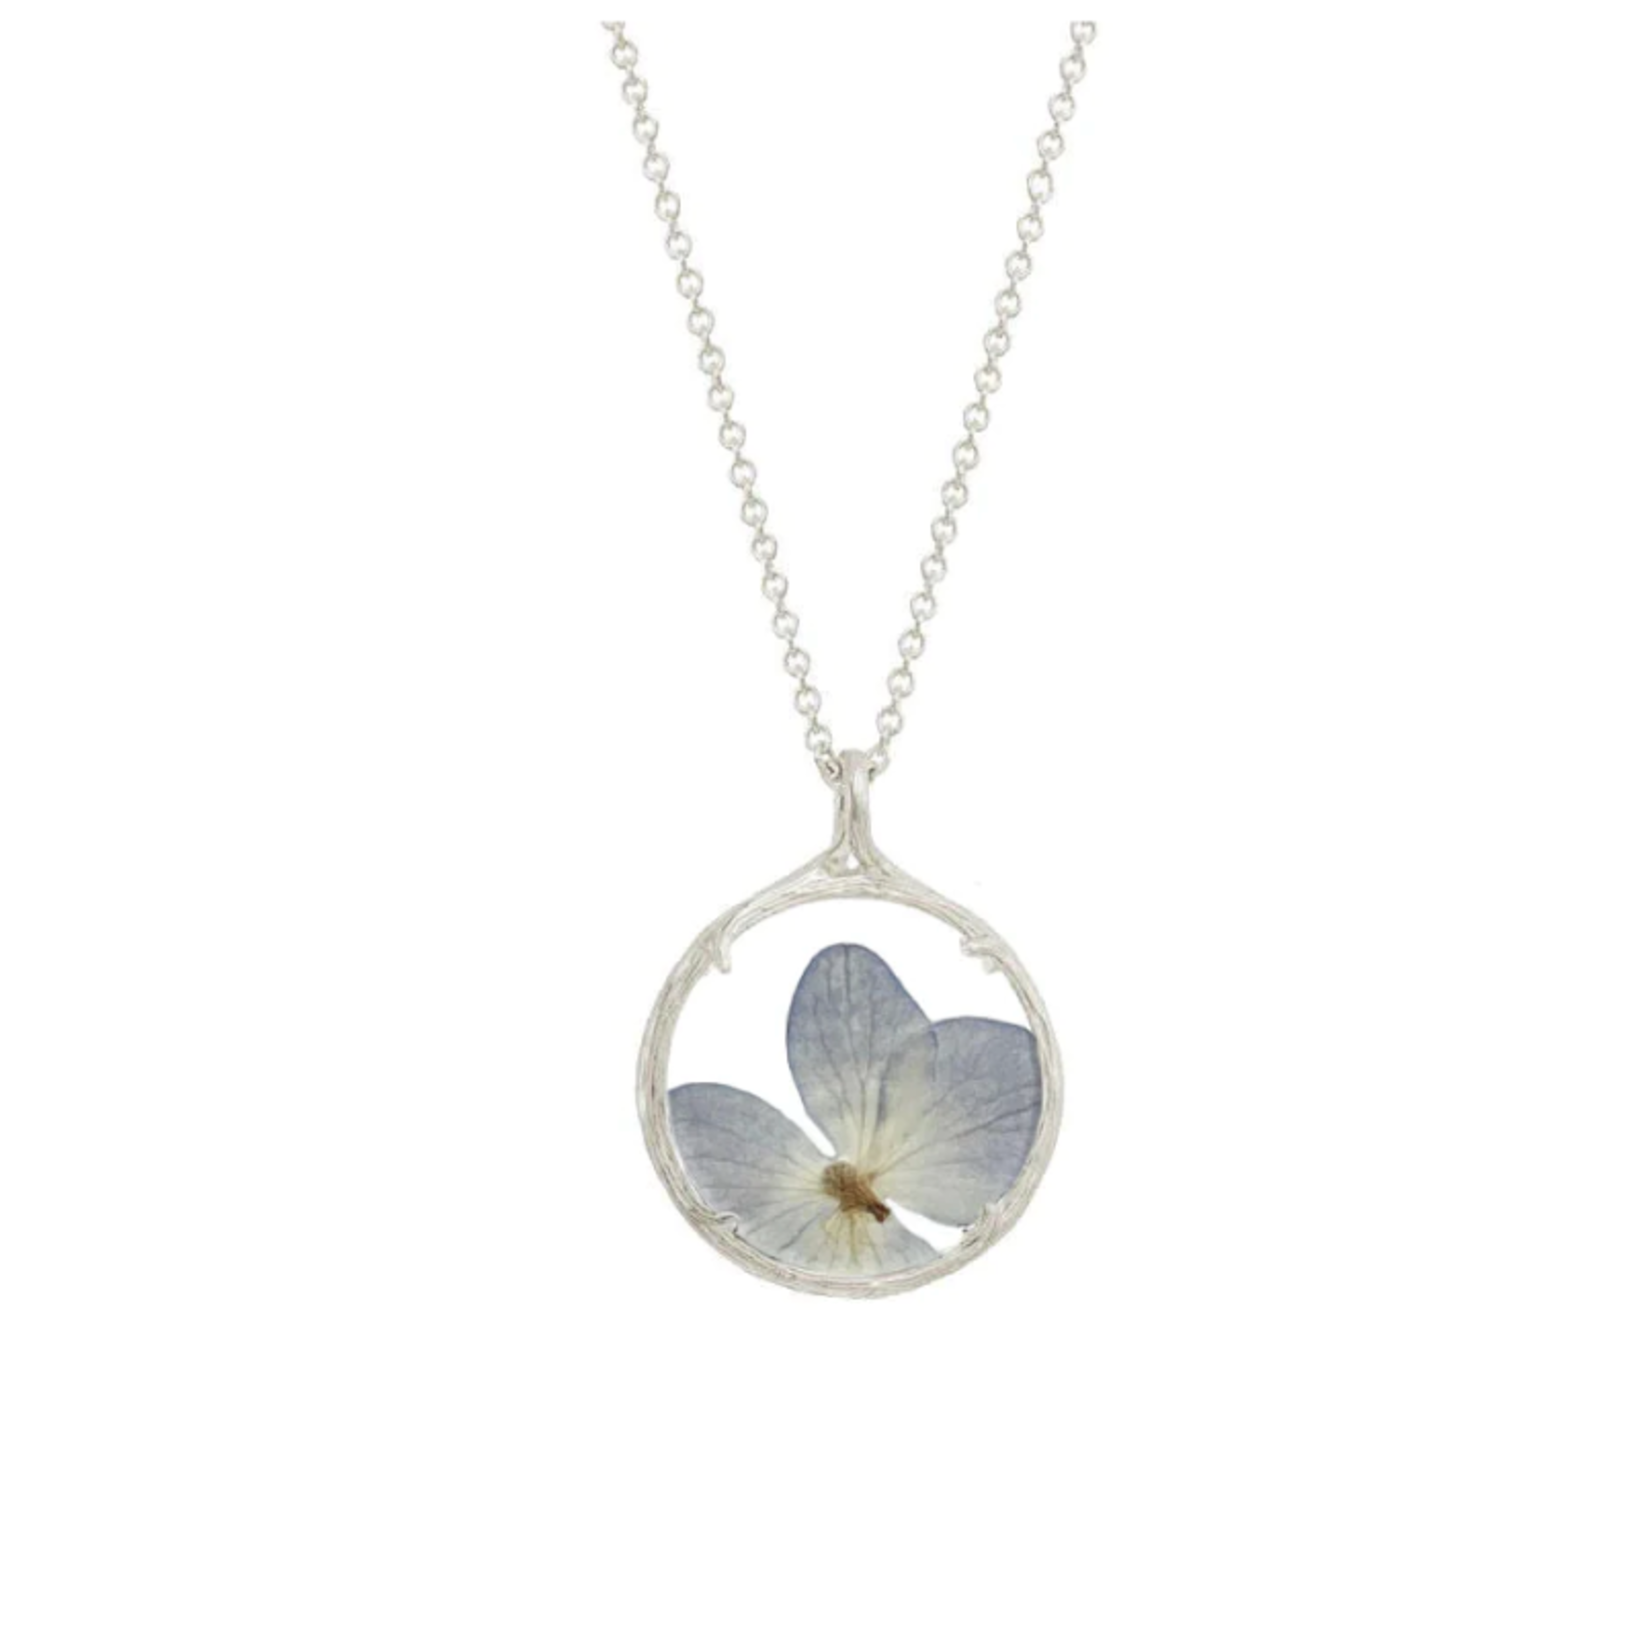 Small Botanical Necklace Blue Hydrangea, Sterling Silver